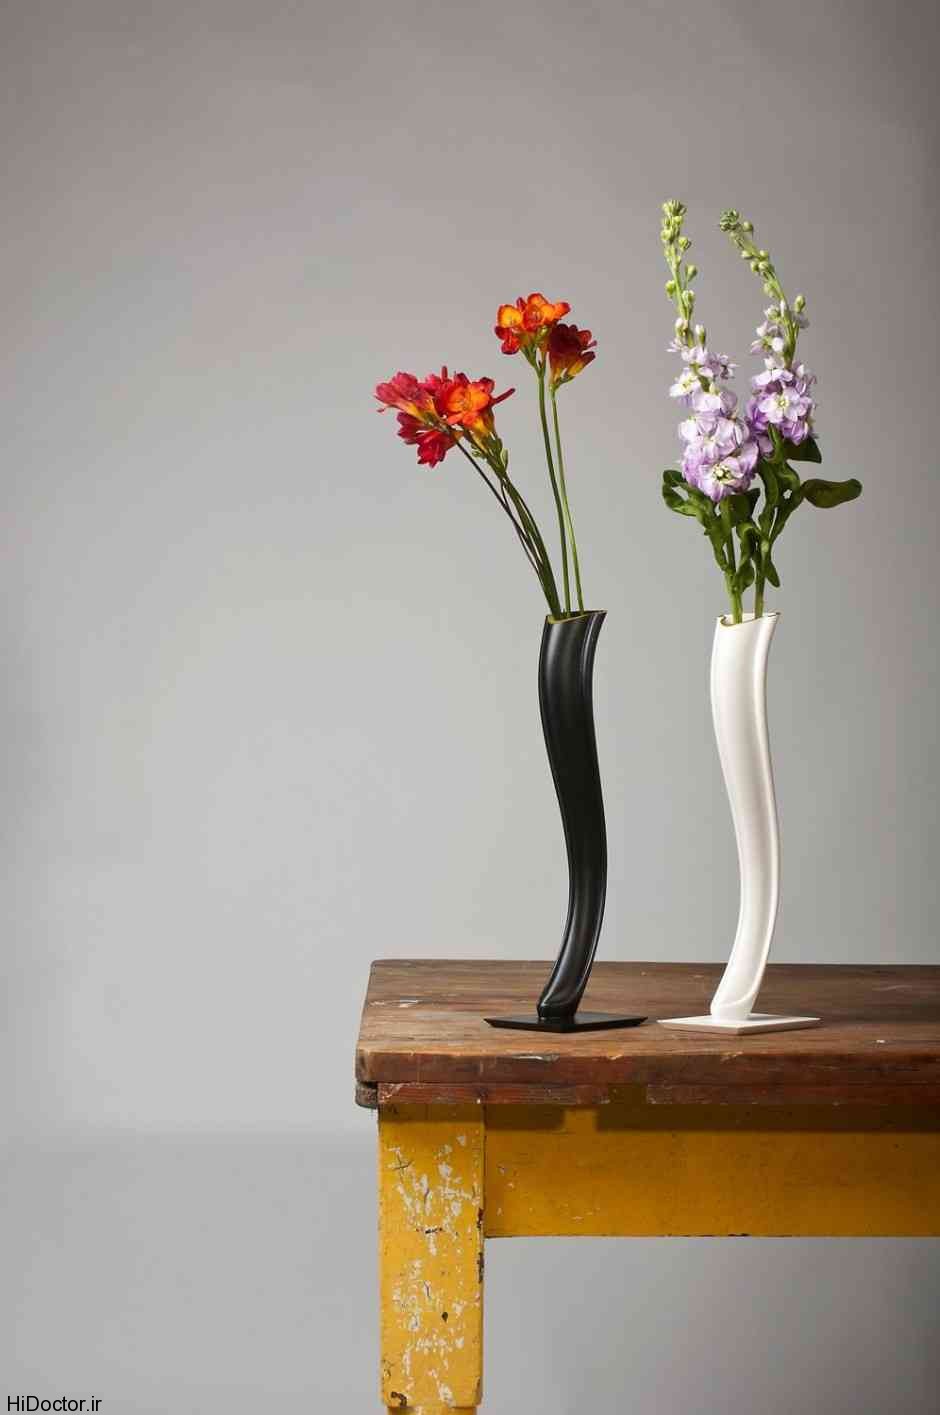 flowers-in-a-vase-on-a-table-attp9kjq